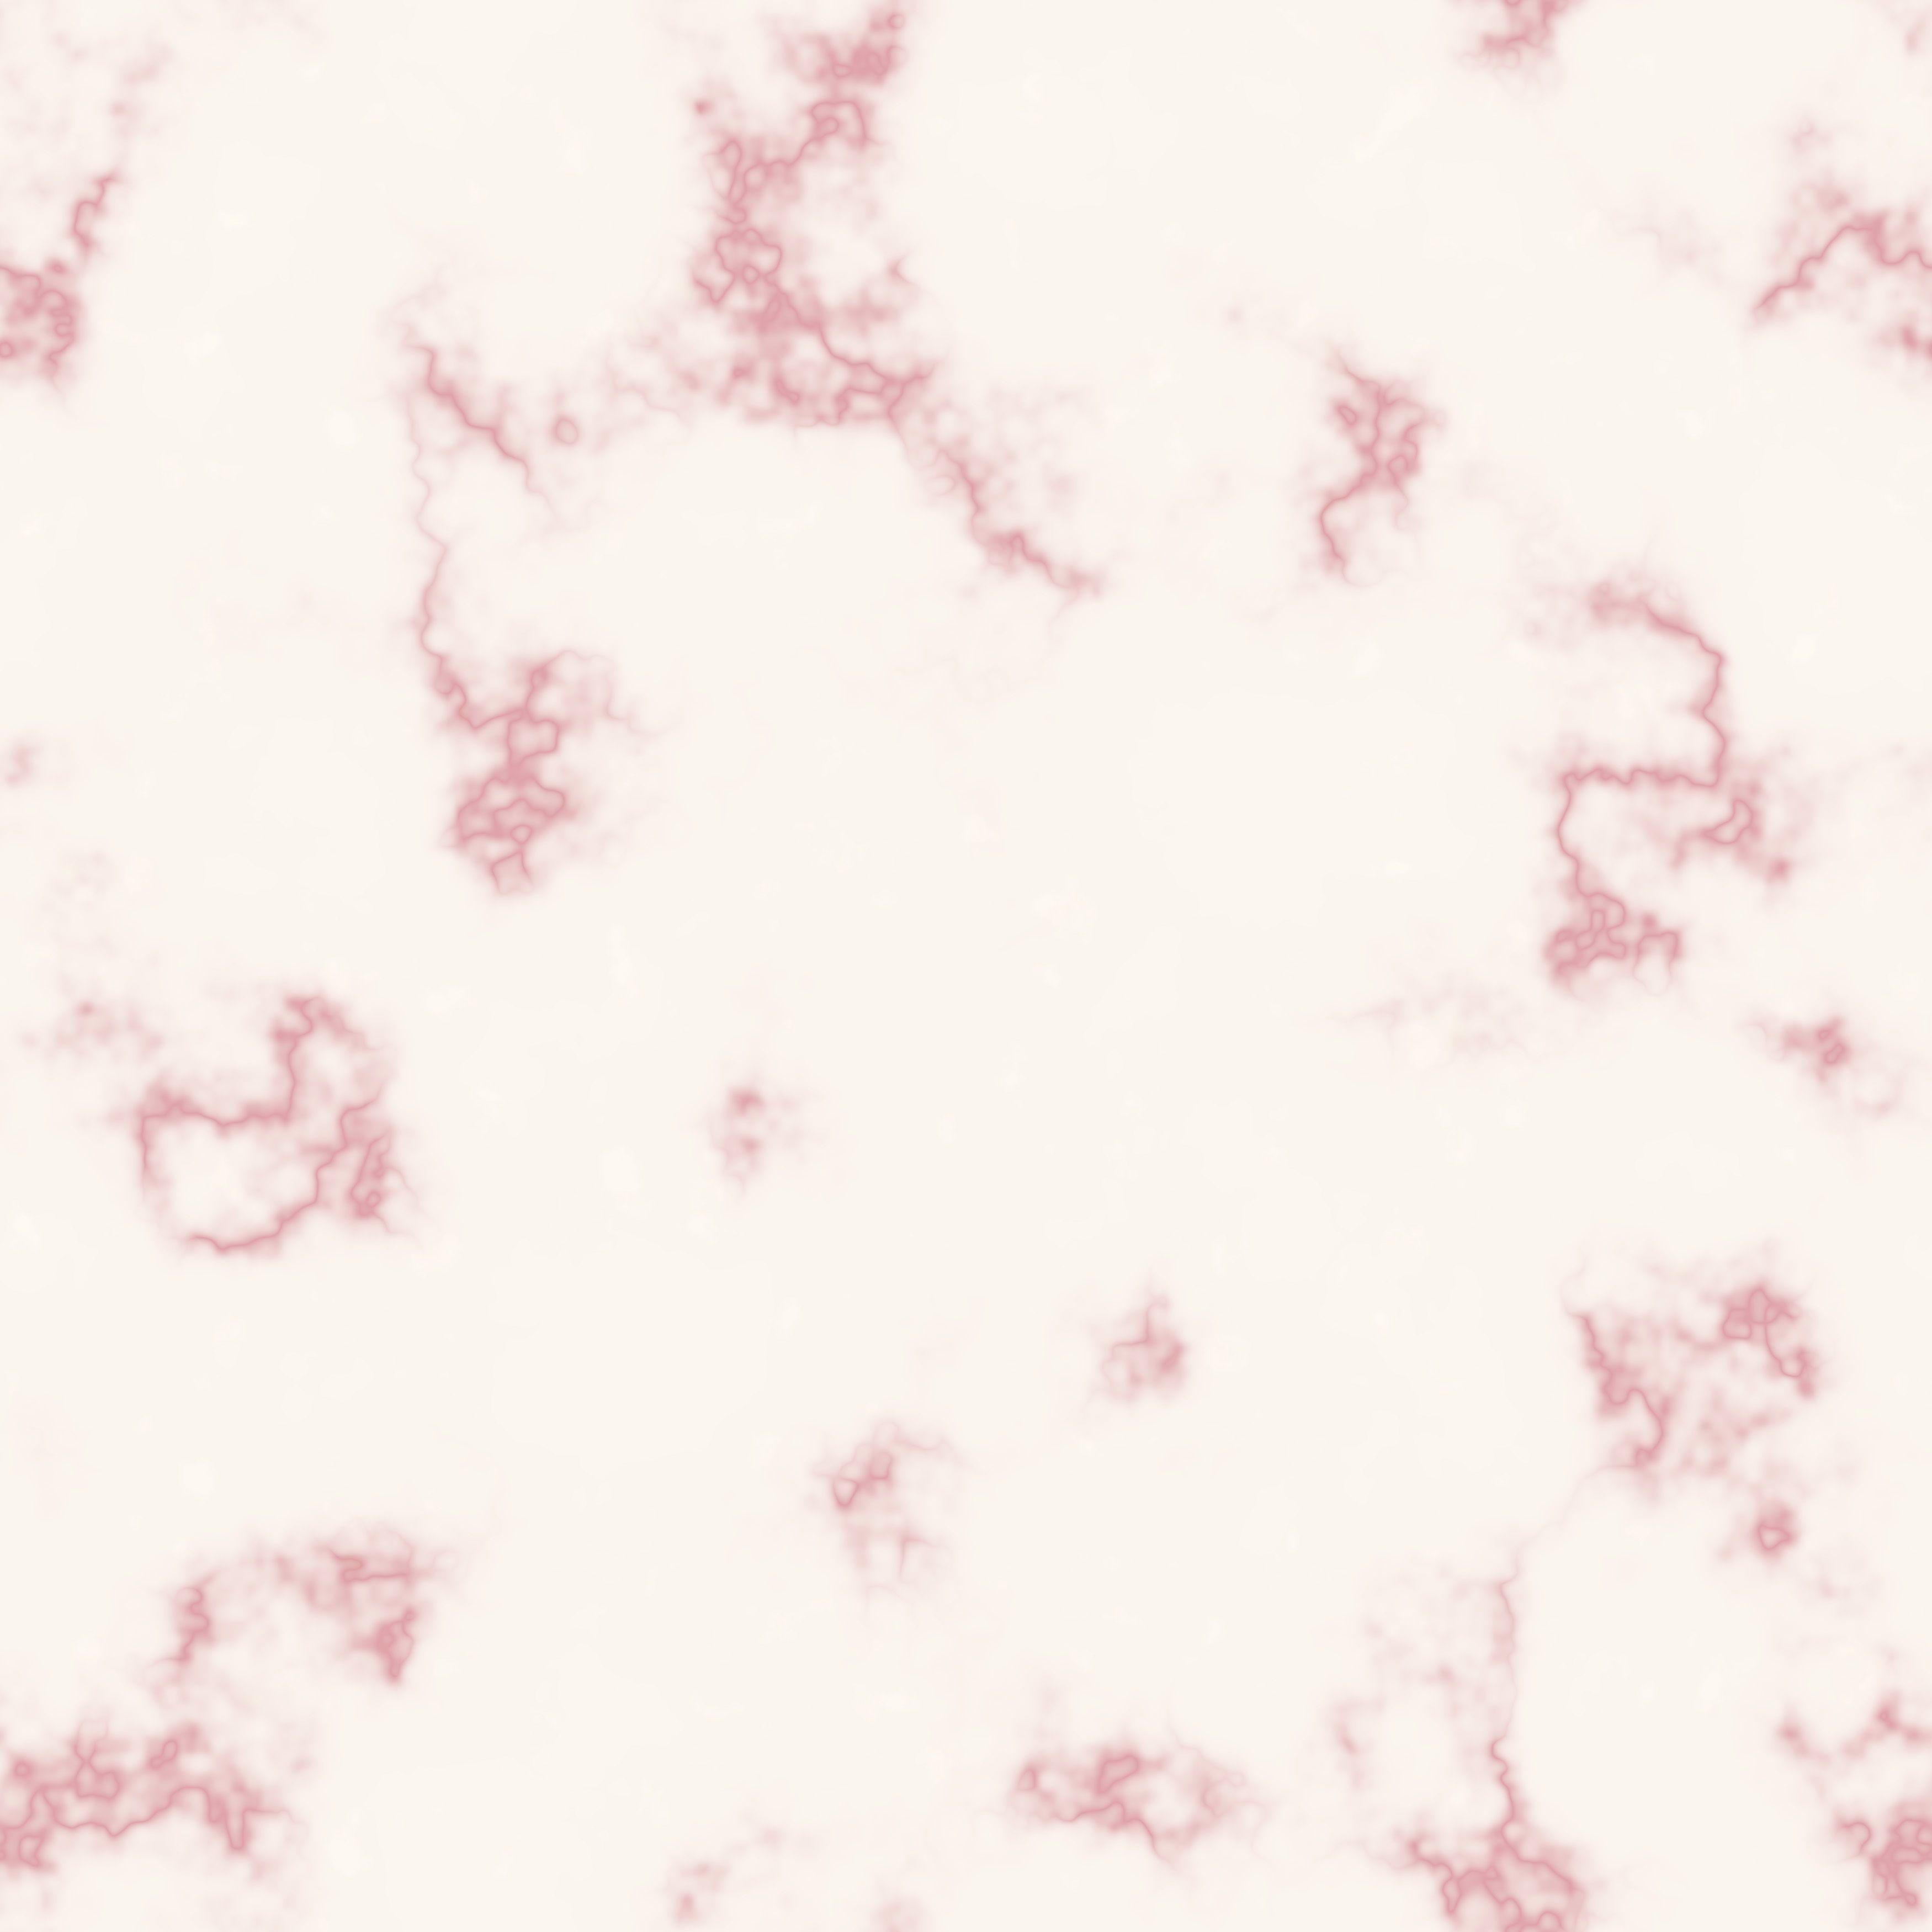 Two seamless pink and cream marble texture background